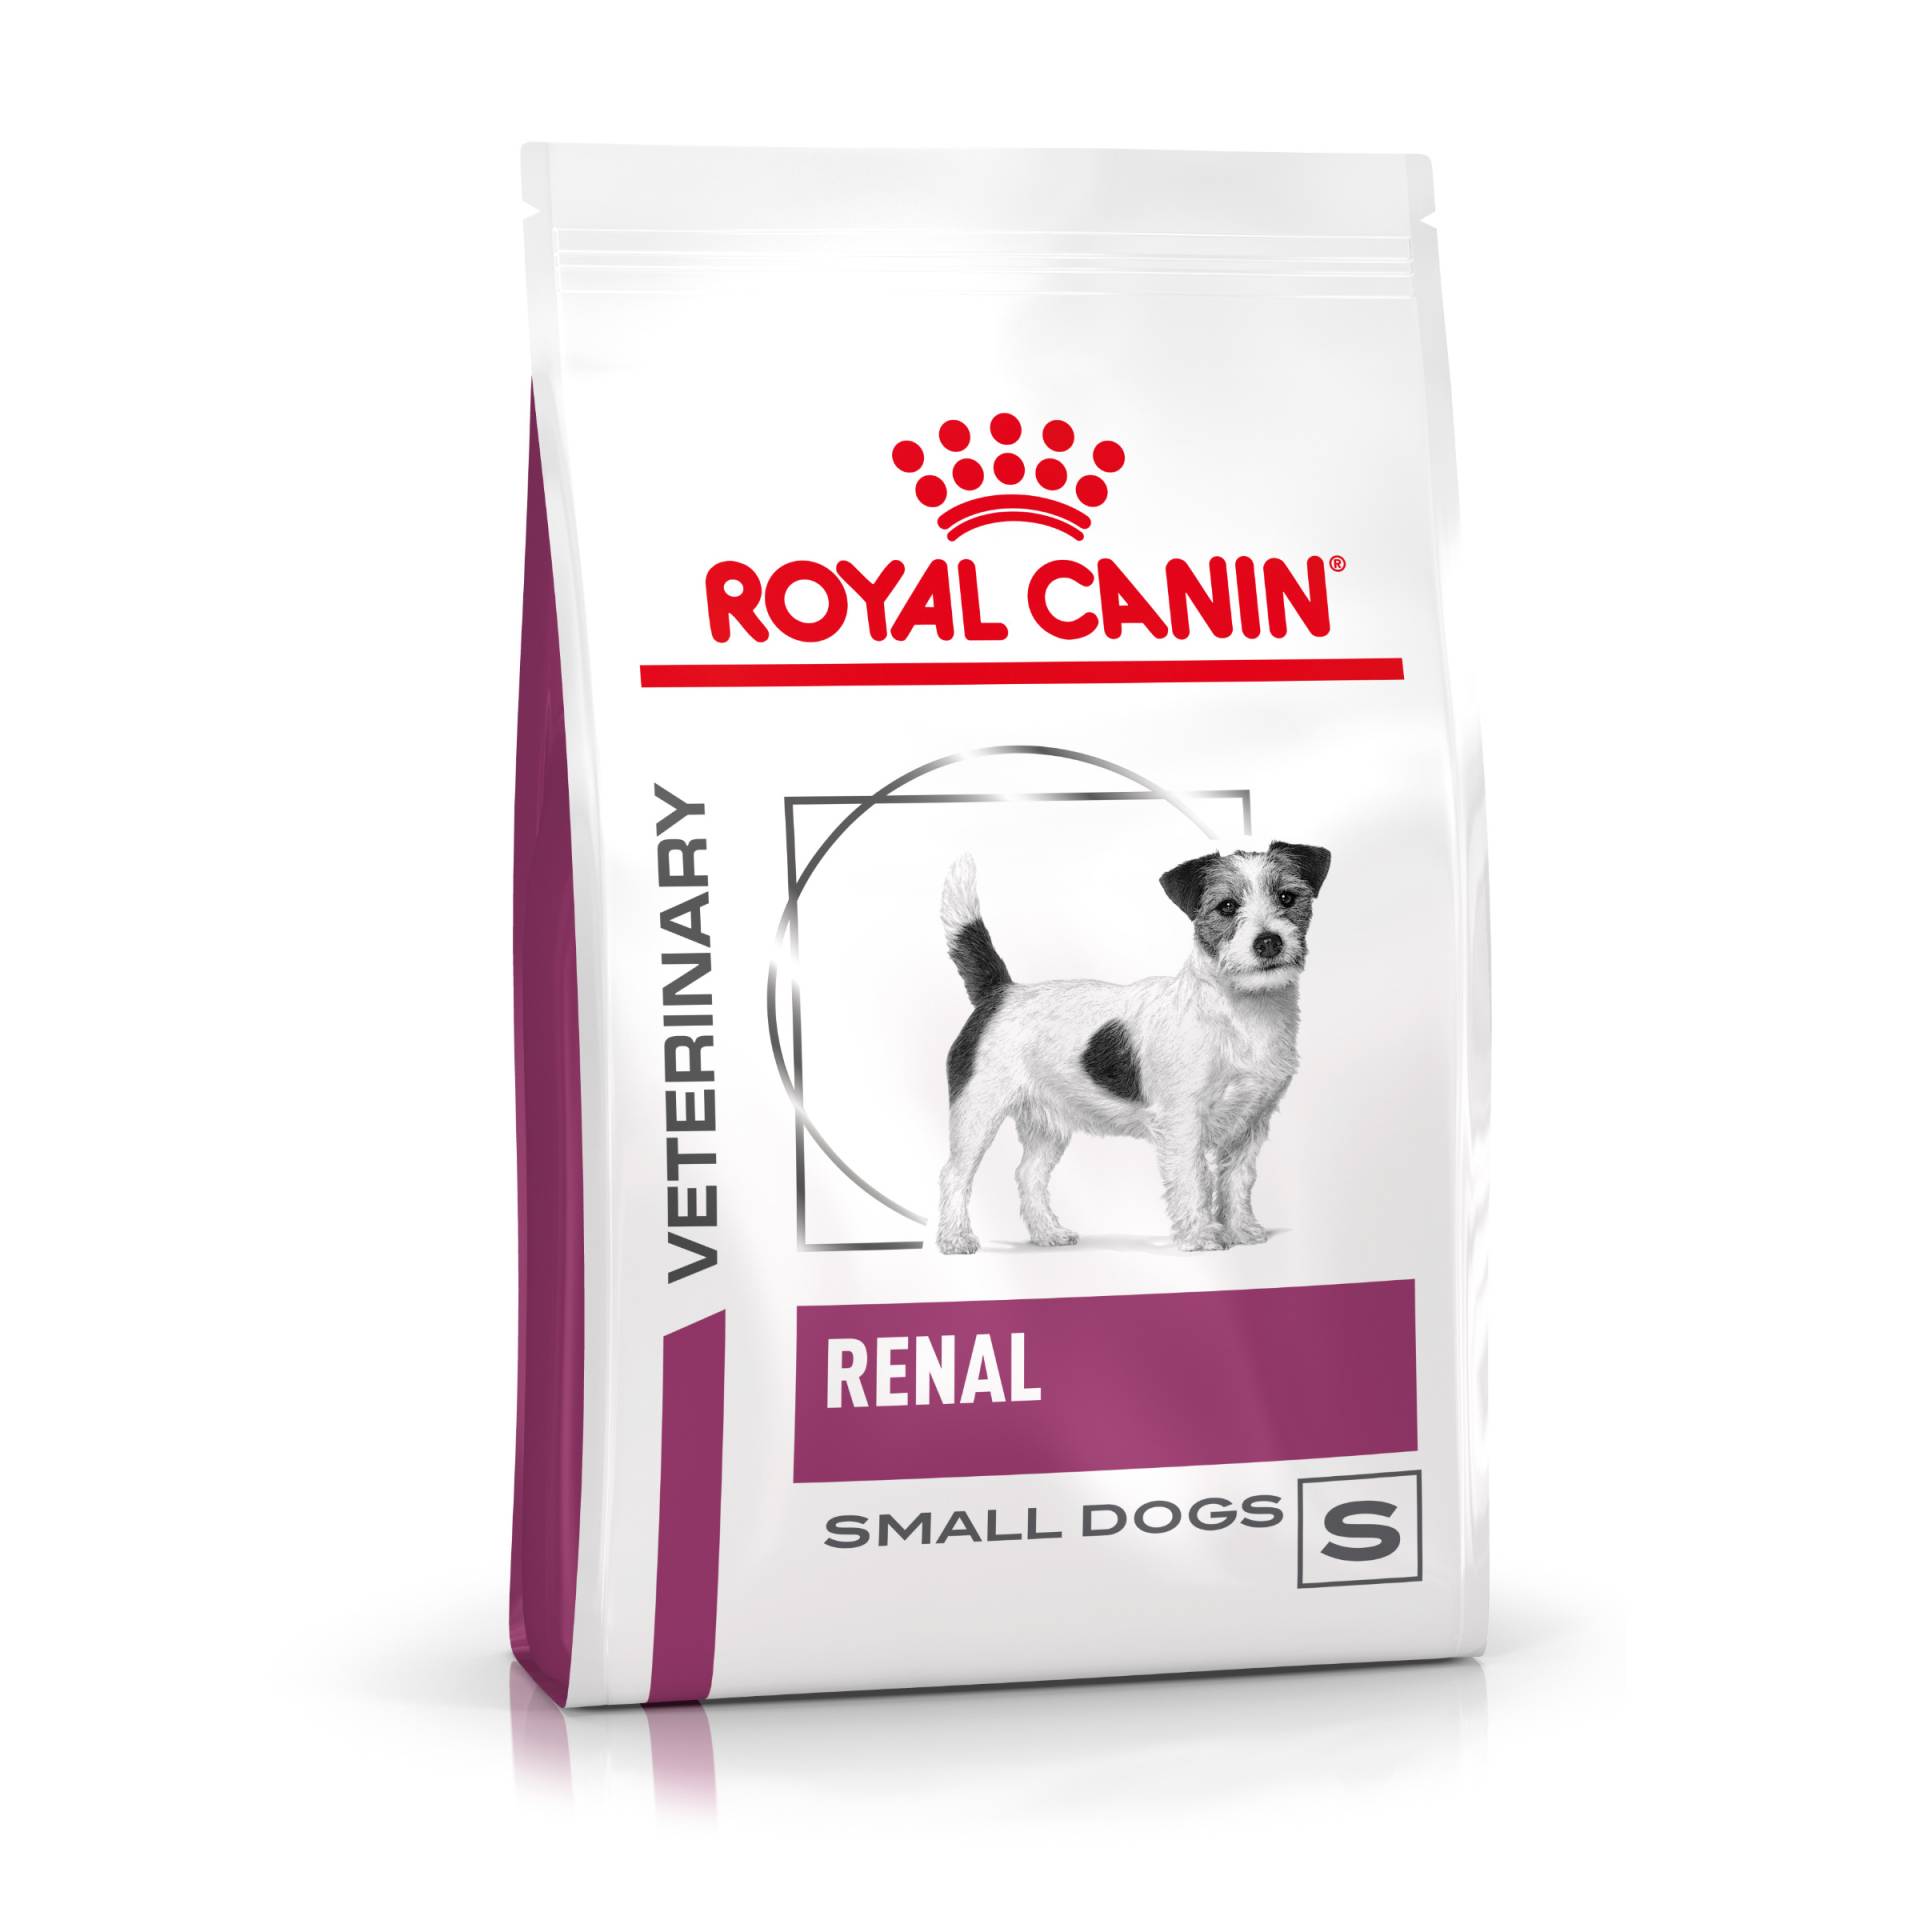 Royal Canin Veterinary Canine Renal Small Dogs - Sparpaket: 2 x 3,5 kg von Royal Canin Veterinary Diet